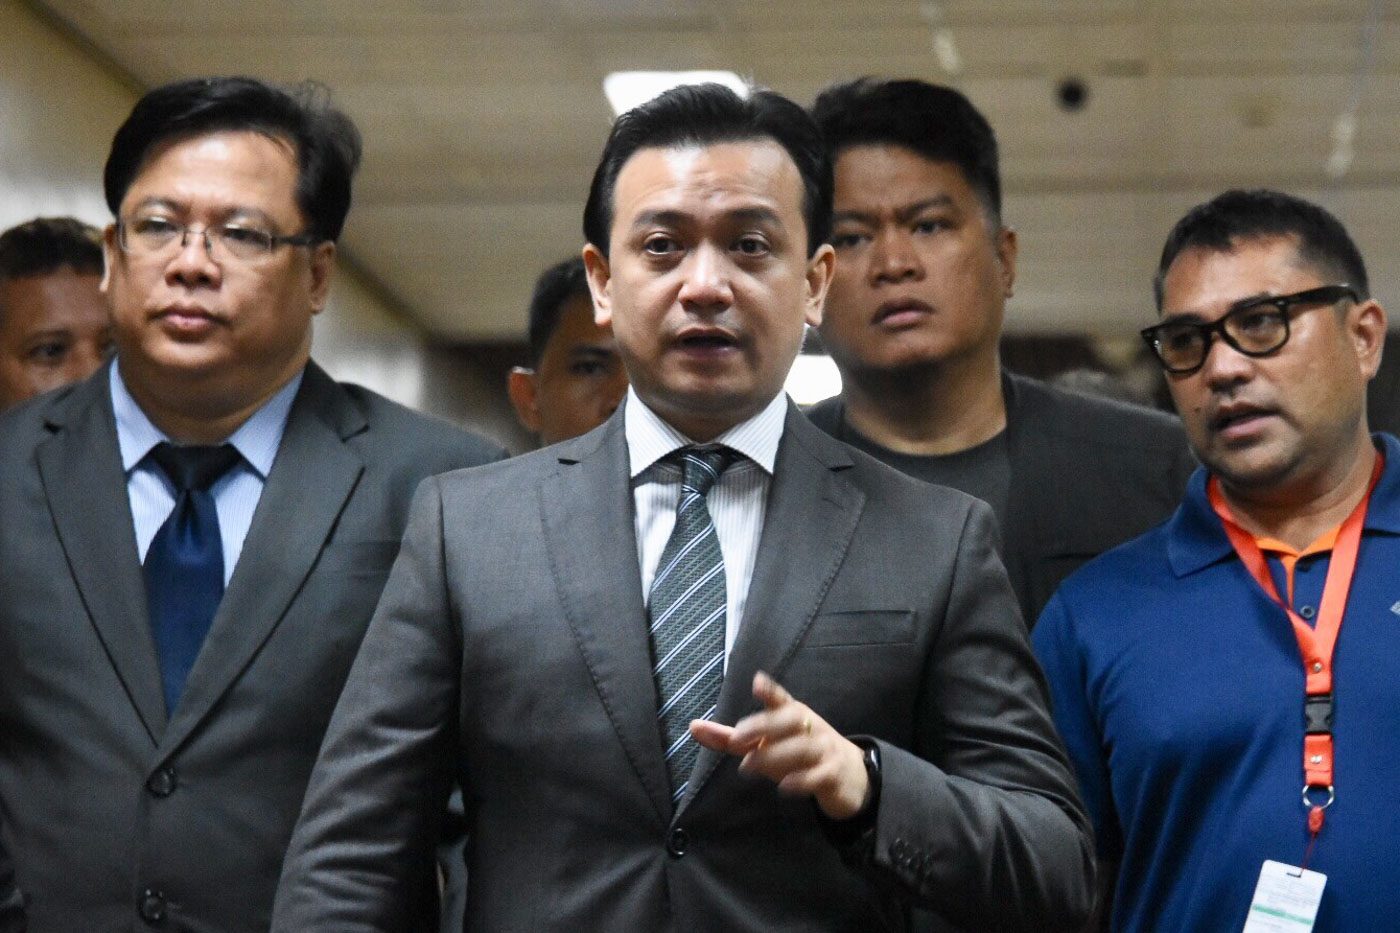 Trillanes taunts Duterte: Watch, you will experience this too